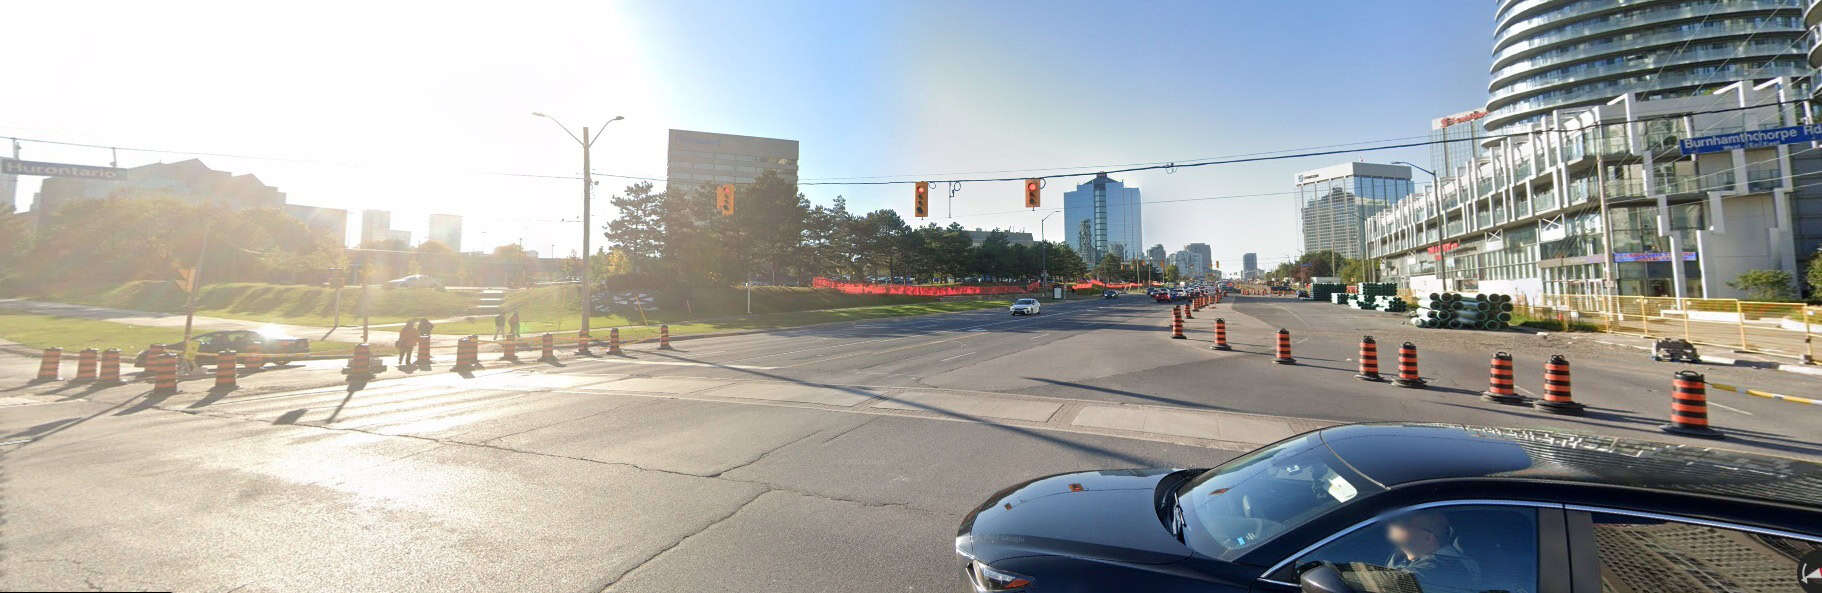 LRT work near Square One in Mississauga will cause traffic slowdowns.